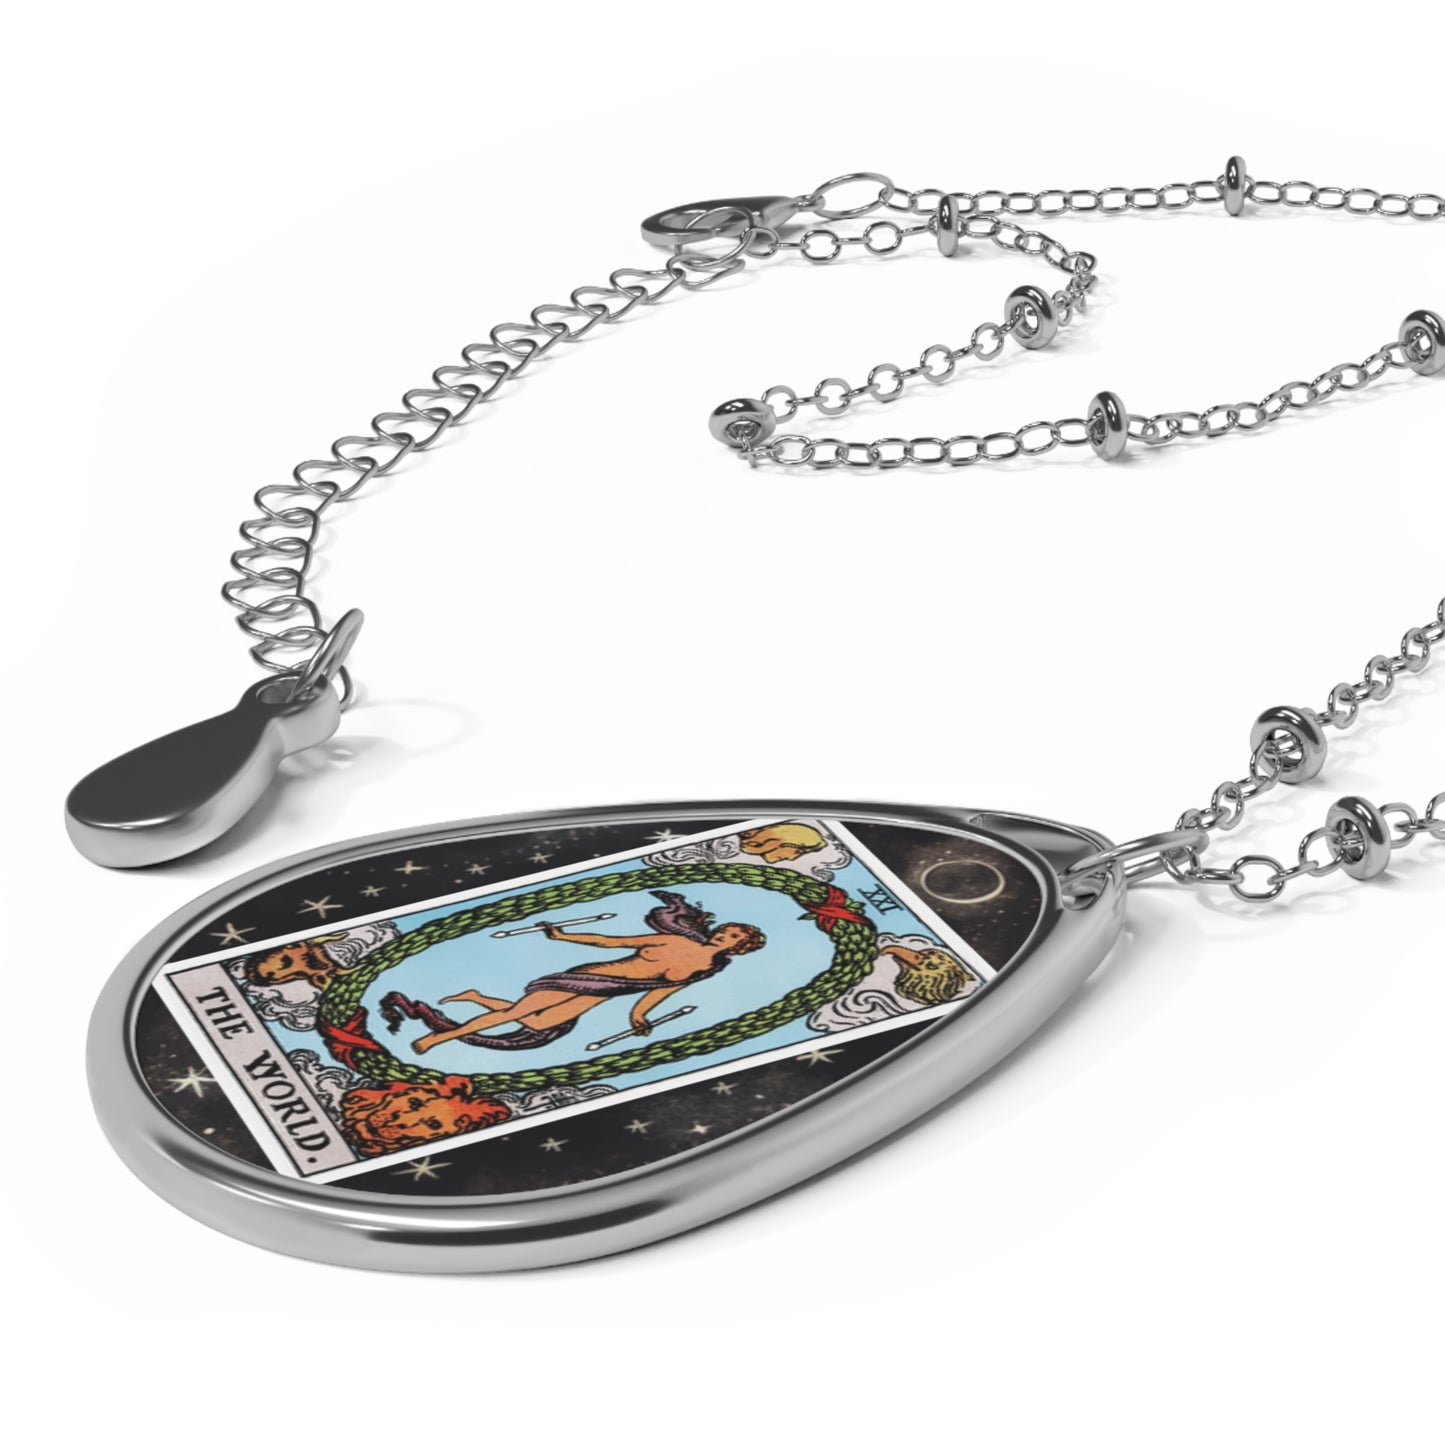 The World Tarot Card Oval Pendant Necklace With Chain and starry background